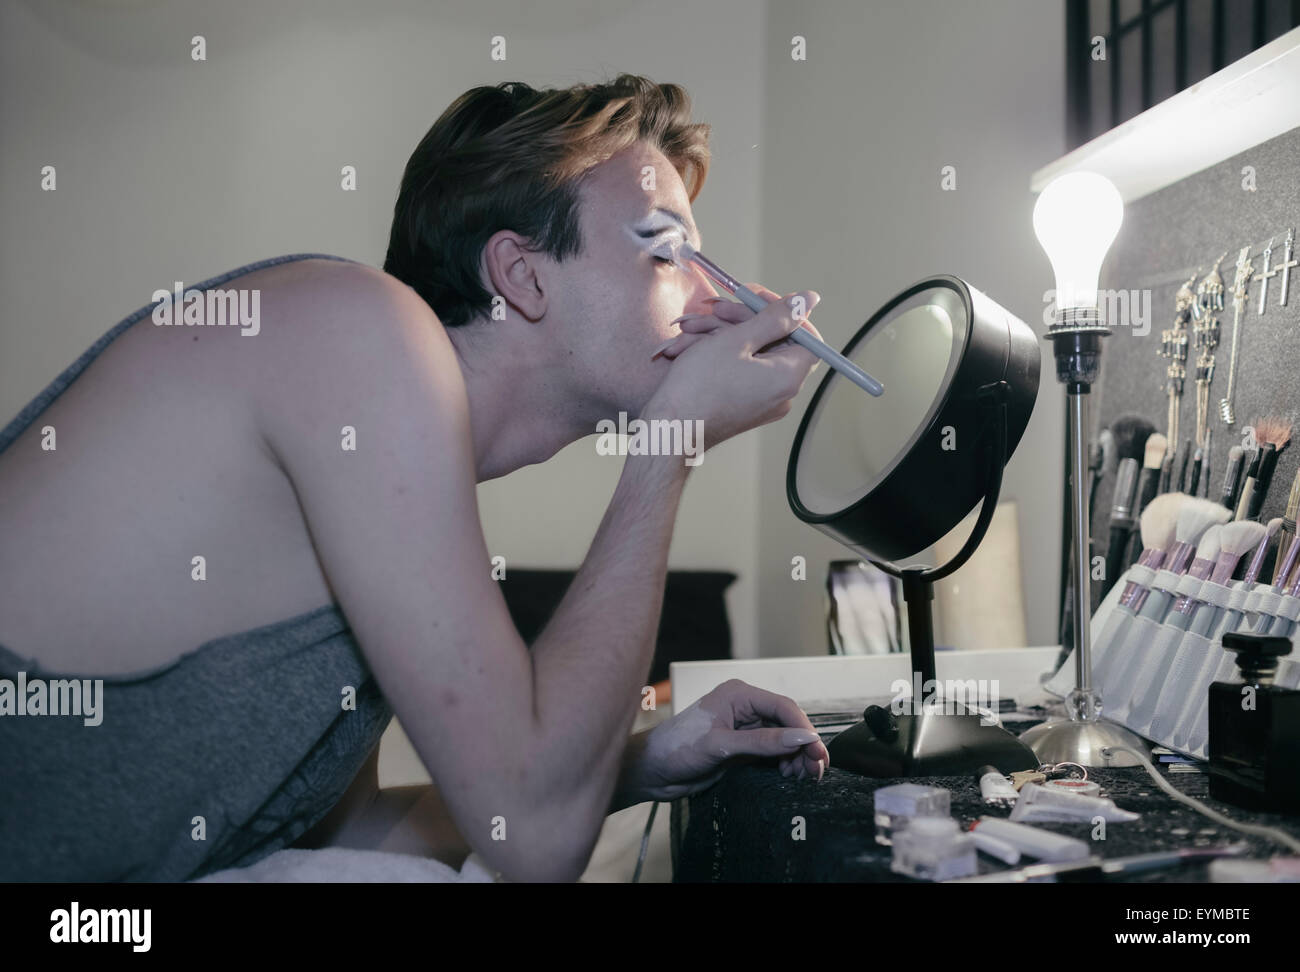 Male drag queen putting on make up and dressing up in preparation for a performance show Stock Photo